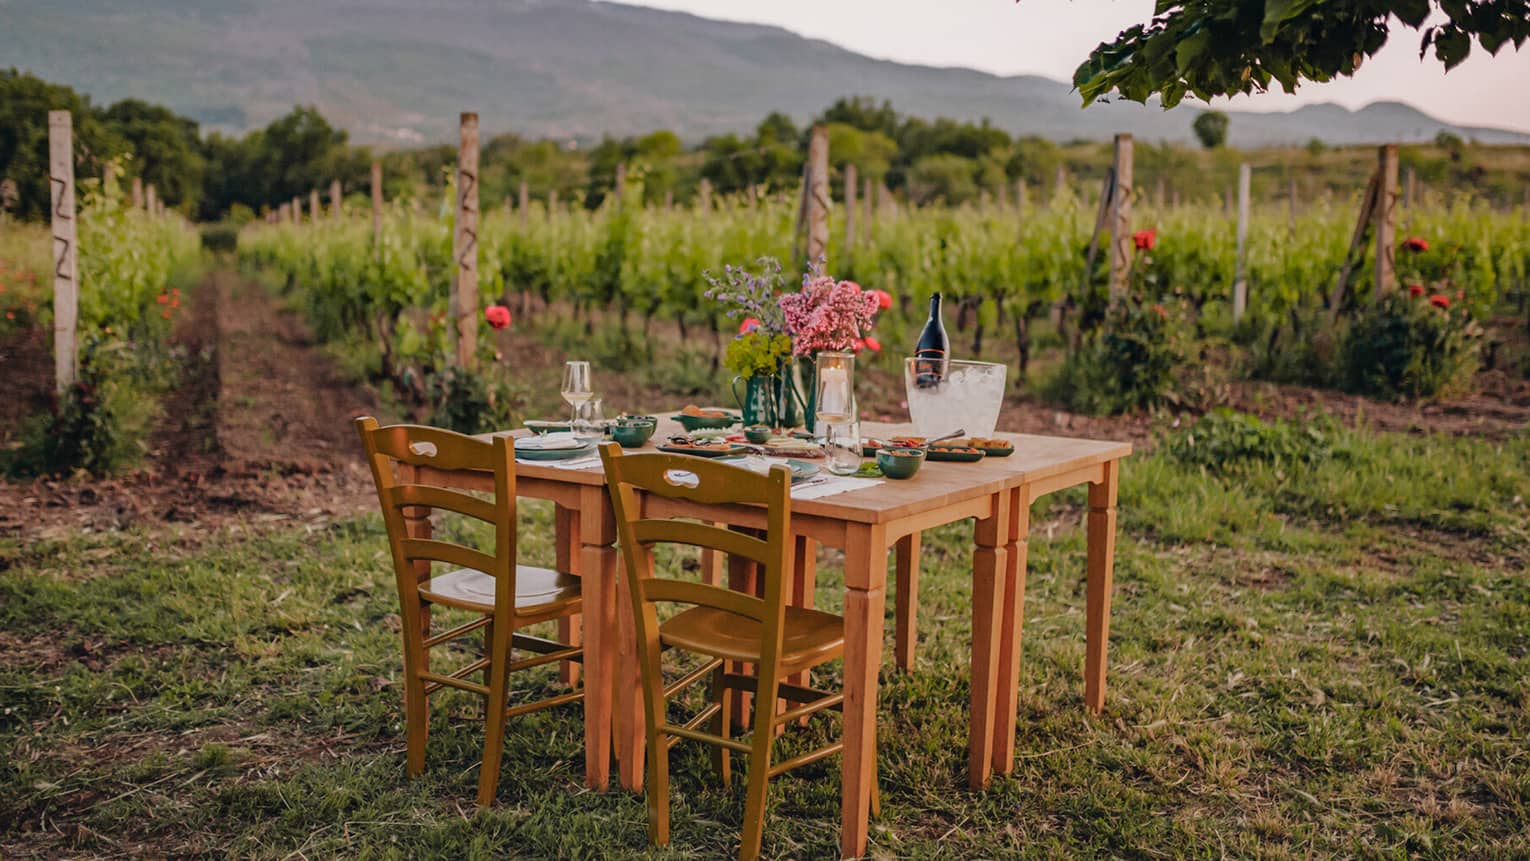 A wooden dining table filled with various dishes and floral arrangements in a lush green vineyard with a mountain view